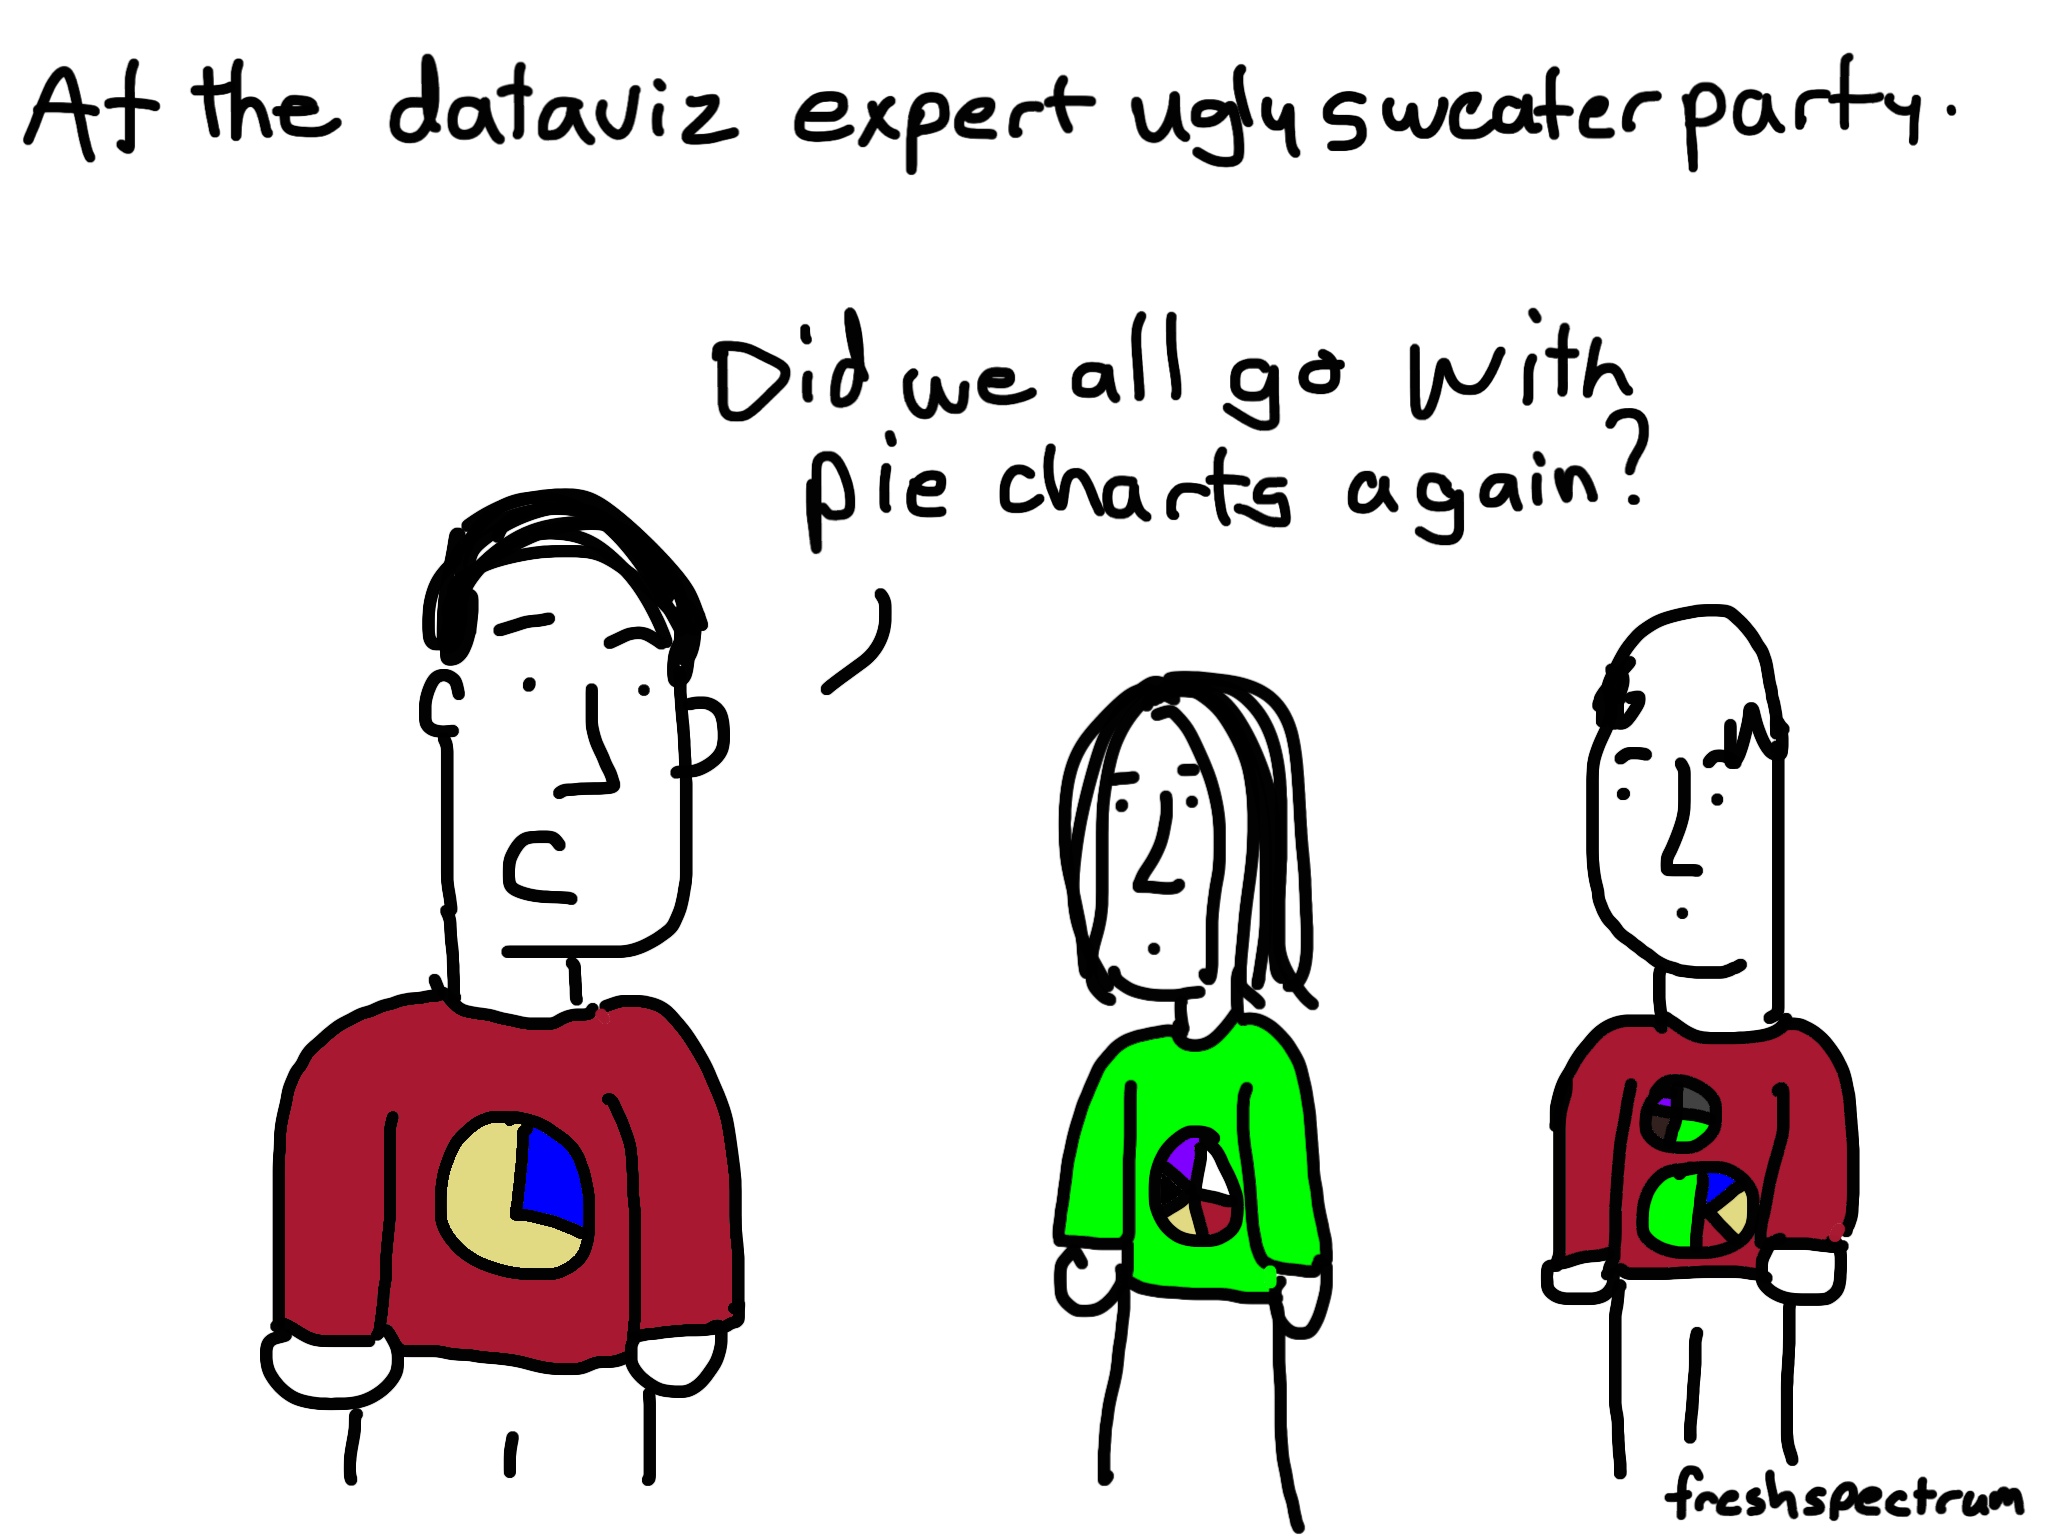 Freshspectrum cartoon by Chris Lysy. "At the dataviz ugly sweater party."
"Did we all go with pie charts again?"